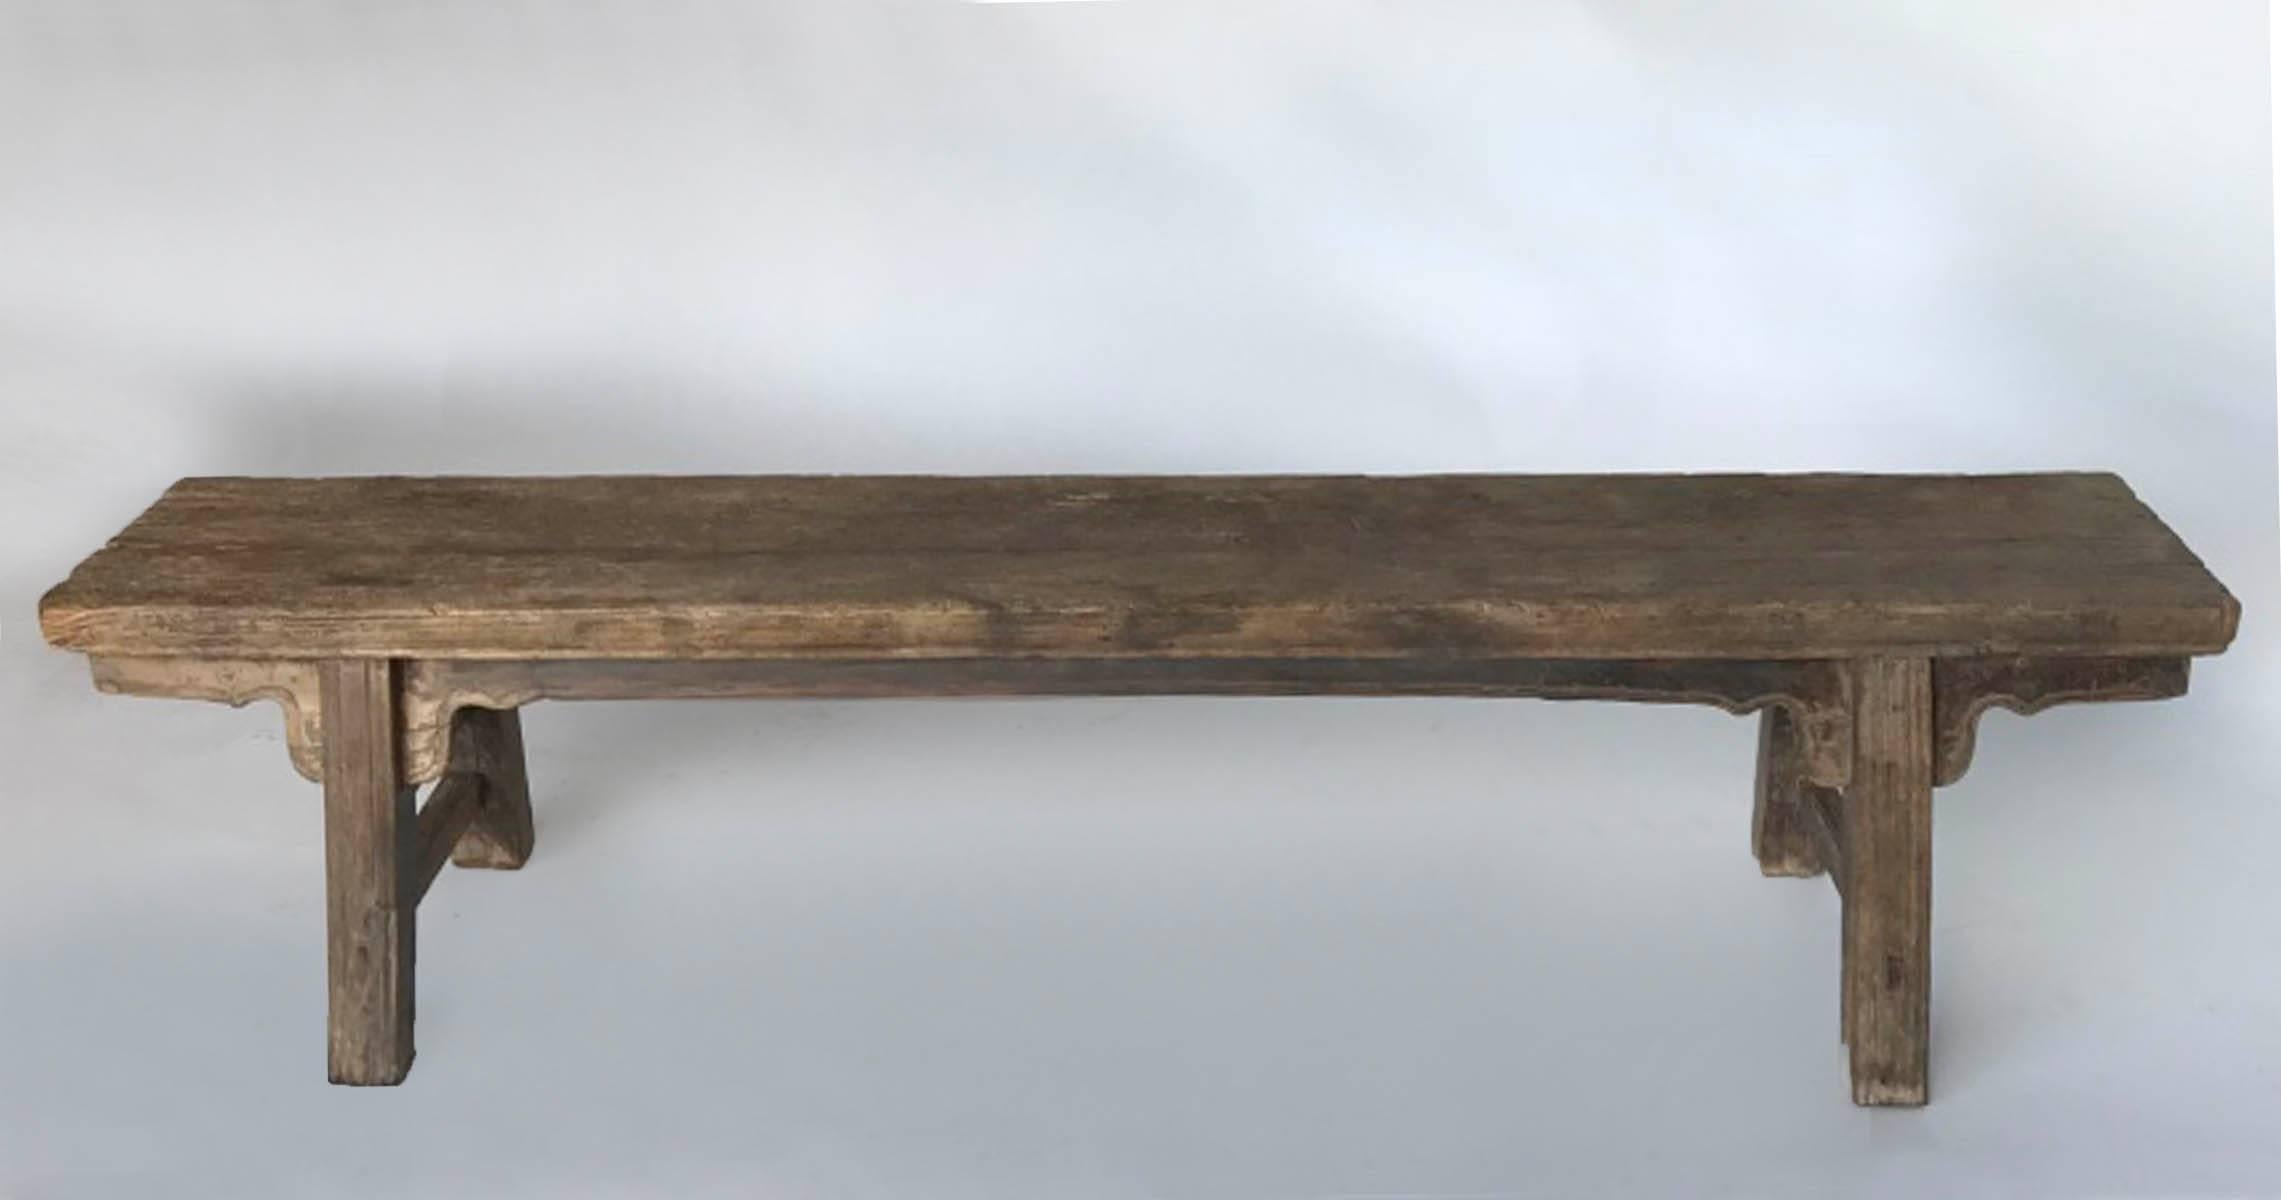 19th century Chinese plank bench made of elm. All original. Mortise and tenon construction. Carved detail on apron. Beautiful old wood with natural grey patina Smooth to the touch. Sturdy and functional.